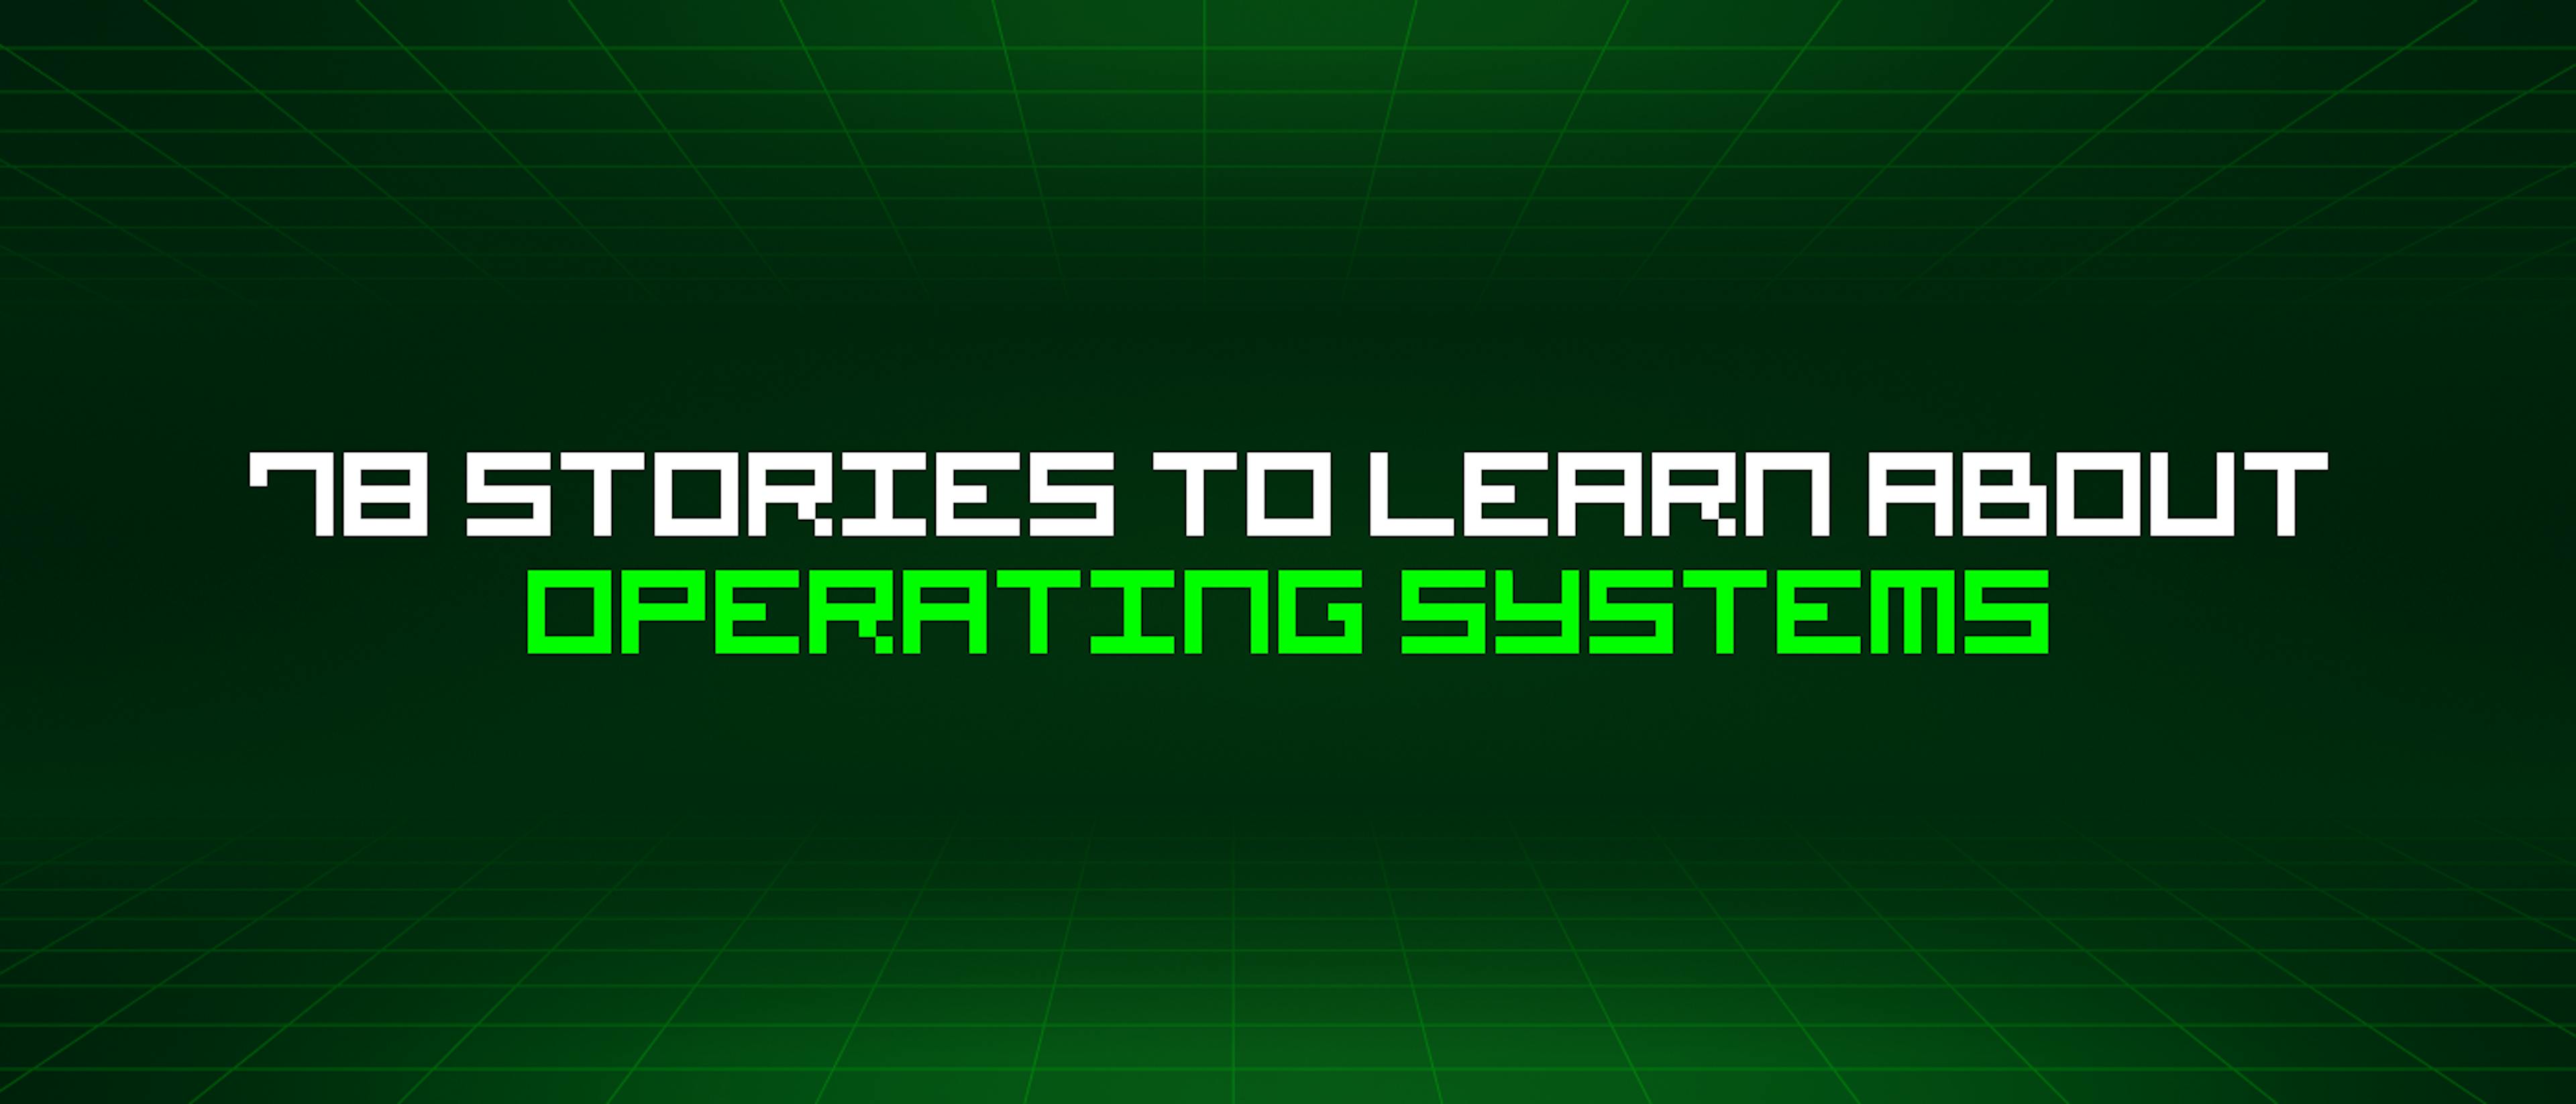 featured image - 78 Stories To Learn About Operating Systems